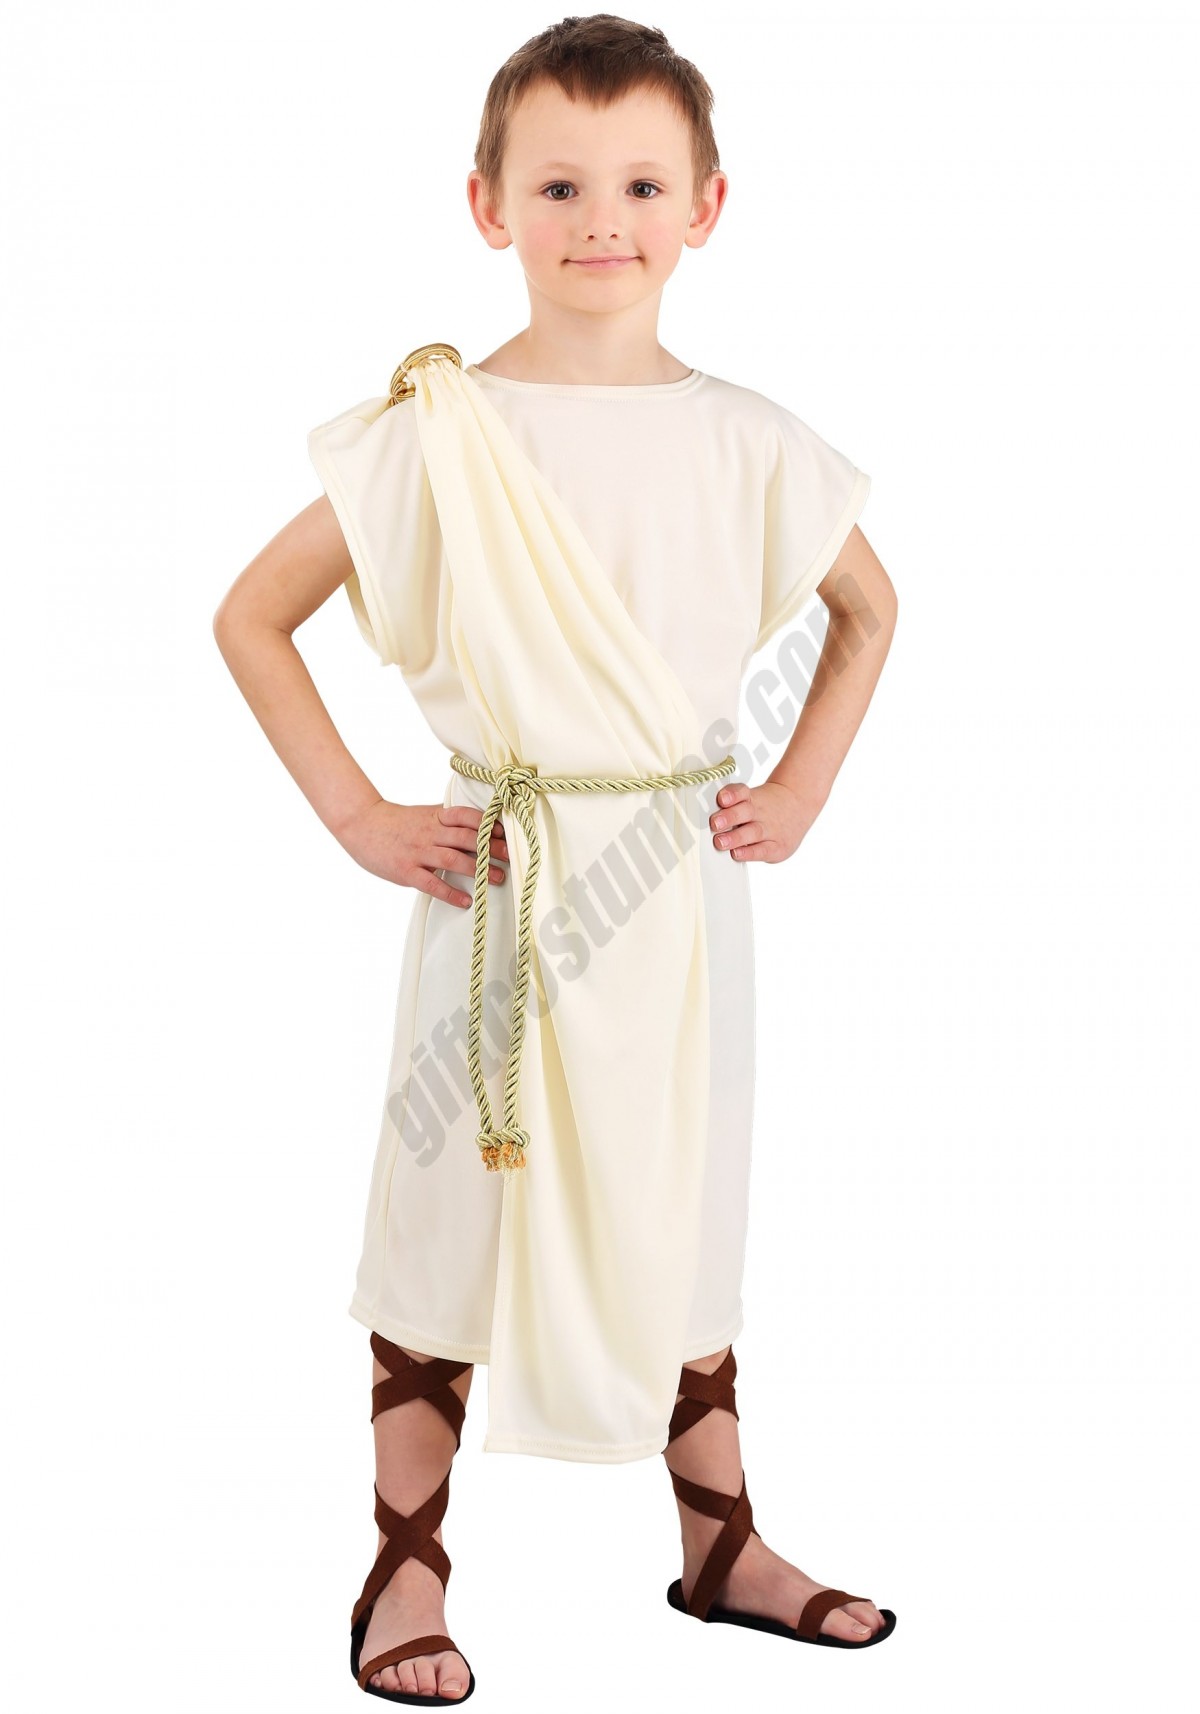 Toddler's Roman Toga Costume Promotions - -0